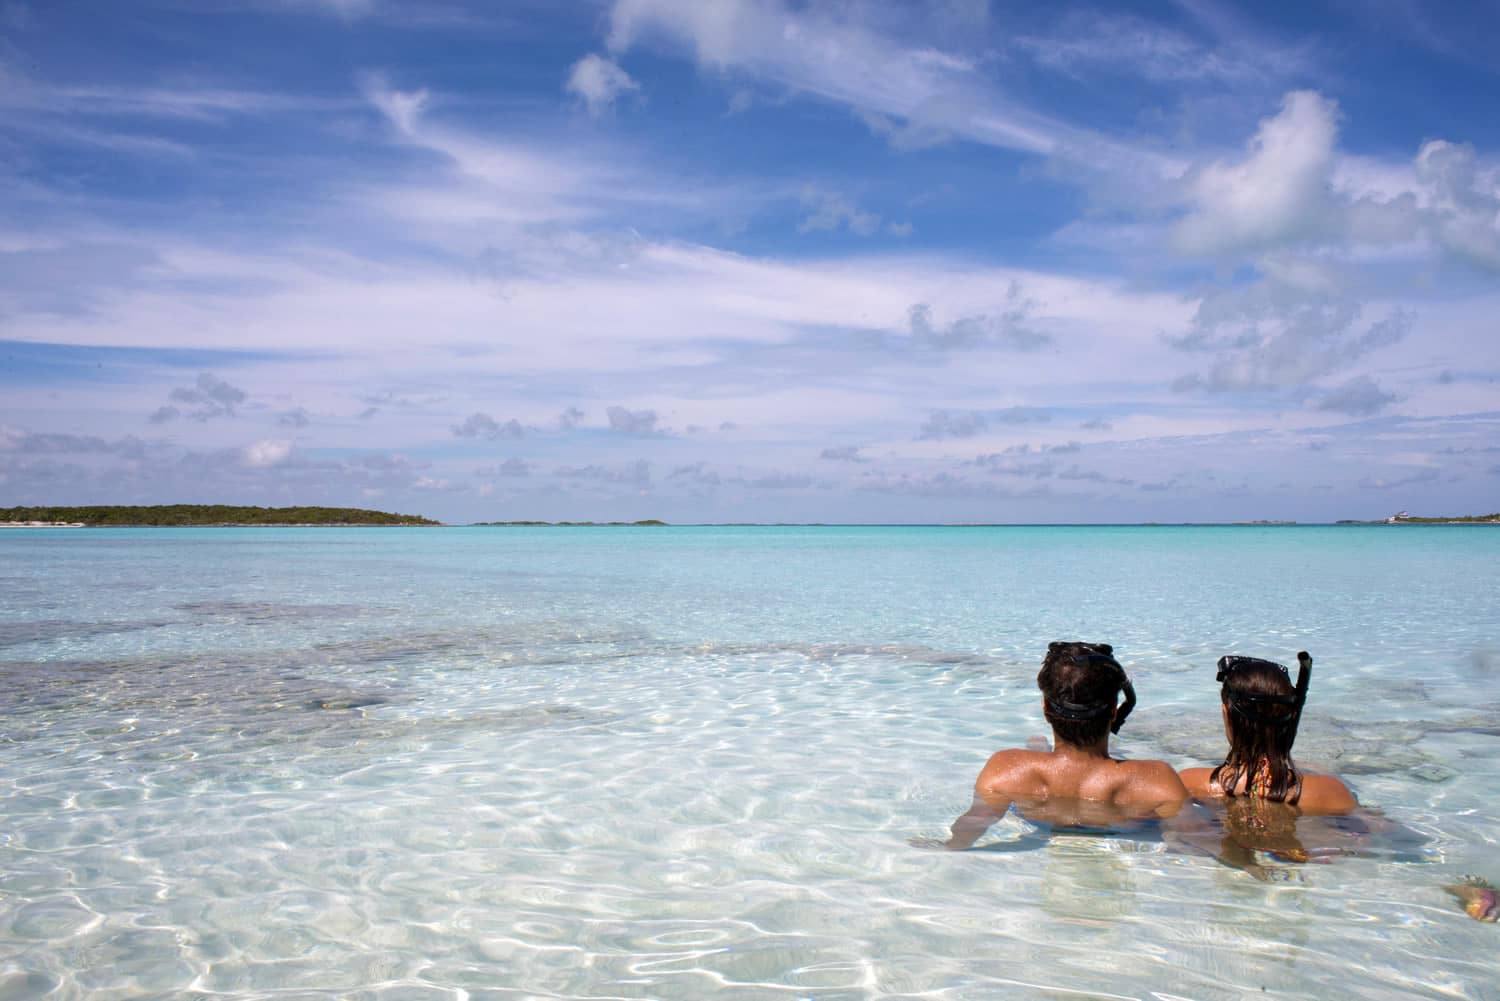 Two people enjoying a relaxing swim in the crystal-clear waters of The Bahamas.